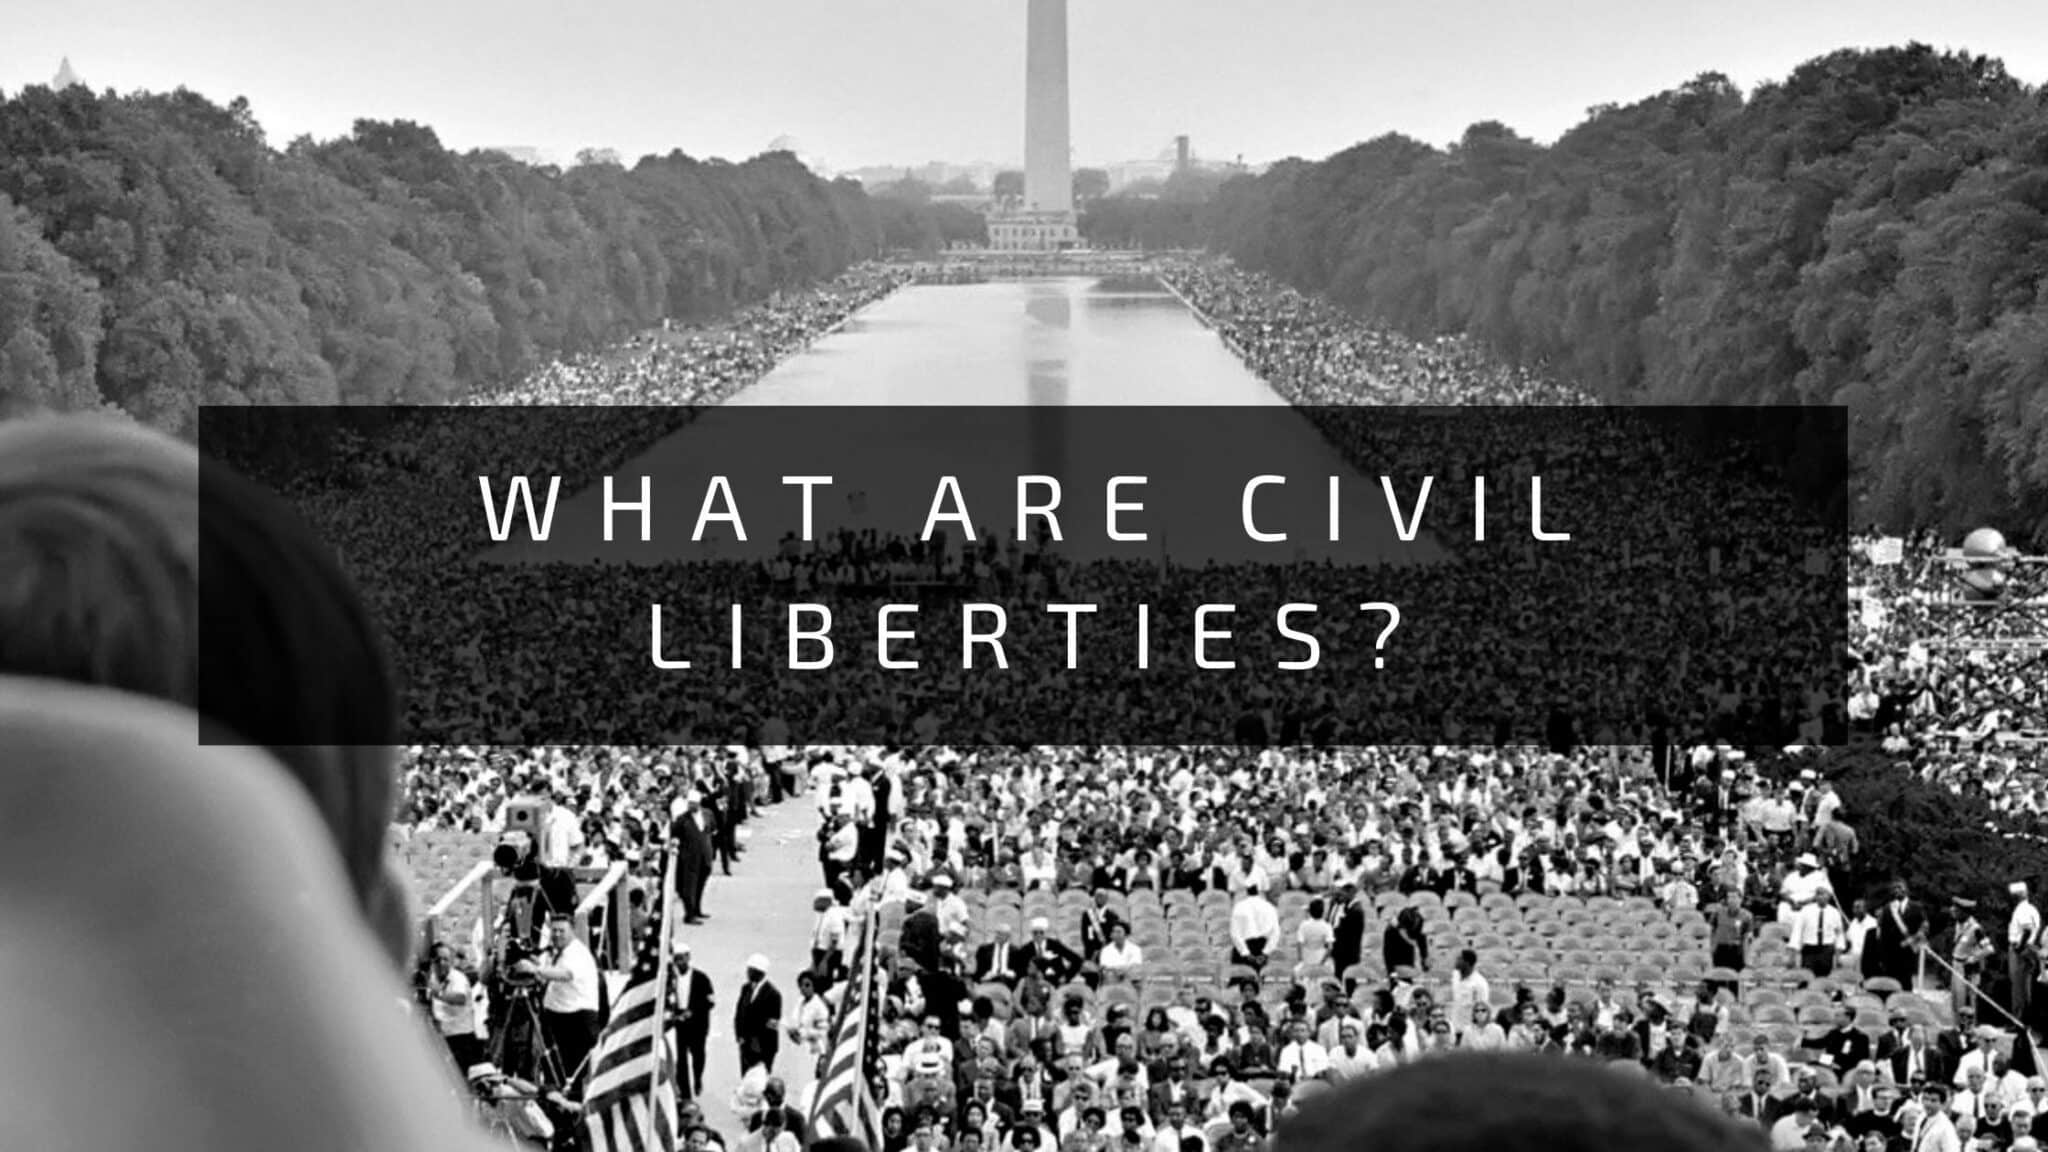 What Are Civil Liberties and Who Do They Apply To in the United States?